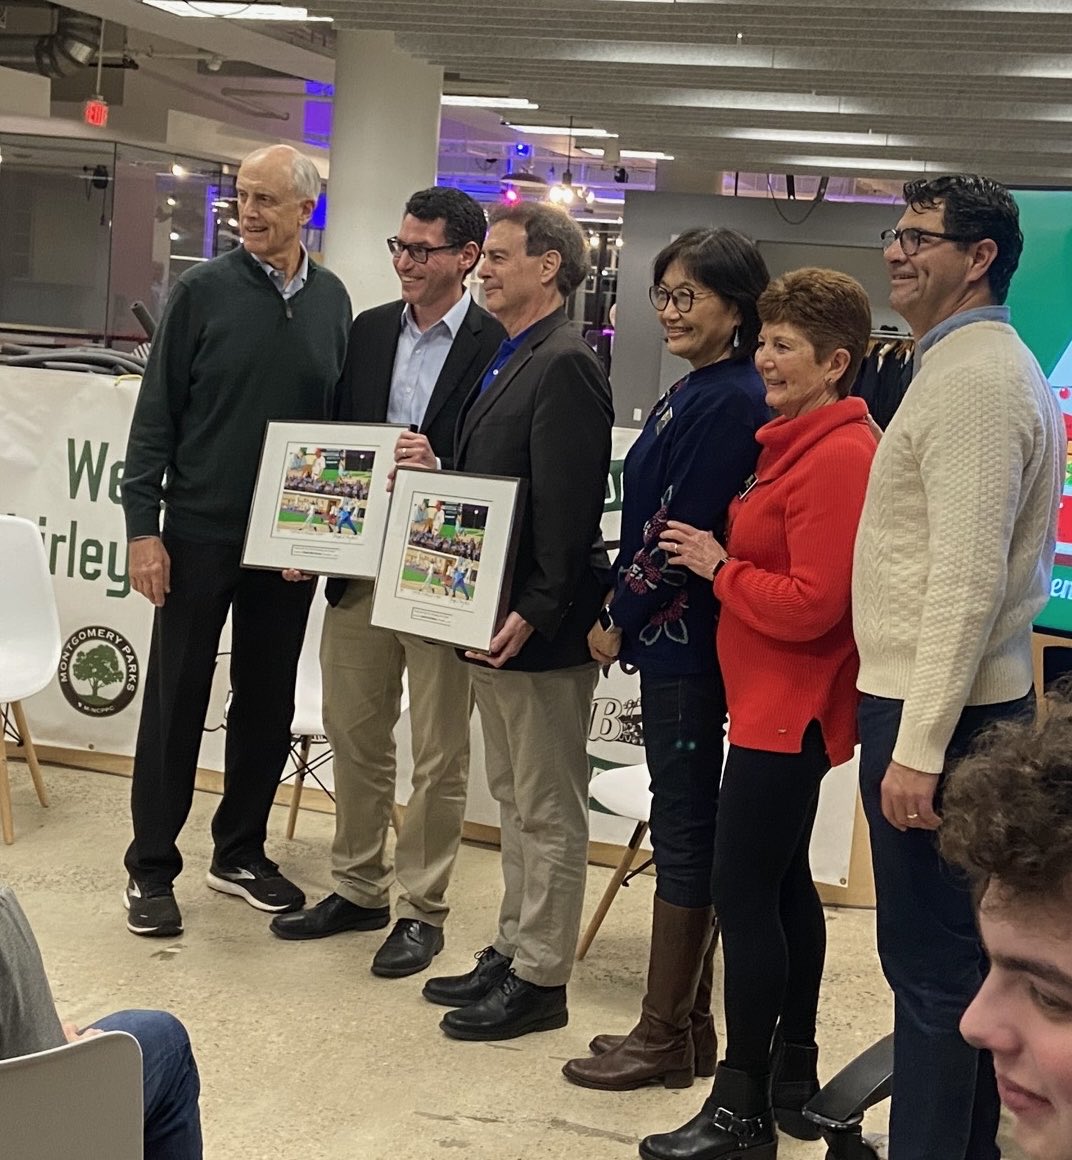 Congratulations to ⁦@BrianJFeldman⁩ and ⁦@mkorman⁩ for being honored by ⁦@GoBigTrain⁩ for their leadership on a major bond initiative to support the Shirley Povich Field. #baseball #working4MD ⁦@Lkfoley⁩ ⁦@albornoz_gabe⁩